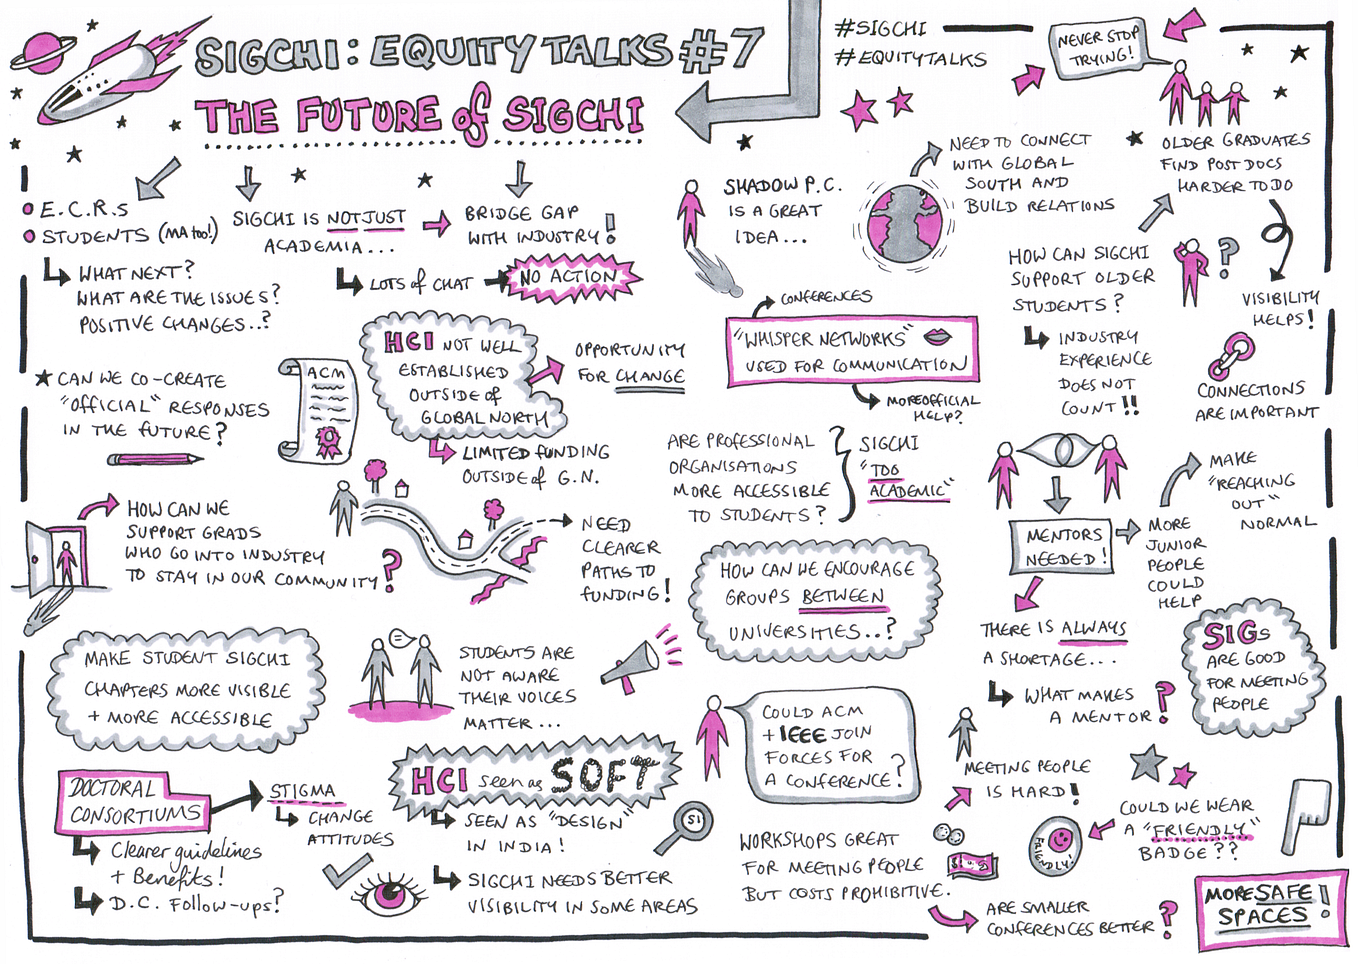 Sketchnotes for Equity Talks #7: Future of SIGCHI. A mixture of small sketches and text with purple highlights summarizing the discussion. Prominent elements include: (1) Limited HCI funding outside of Global North, (2) How can we encourage peer mentorship groups between universities?, (3) make student SIGCHI chapters more visible, accessible, (4) More safe spaces!